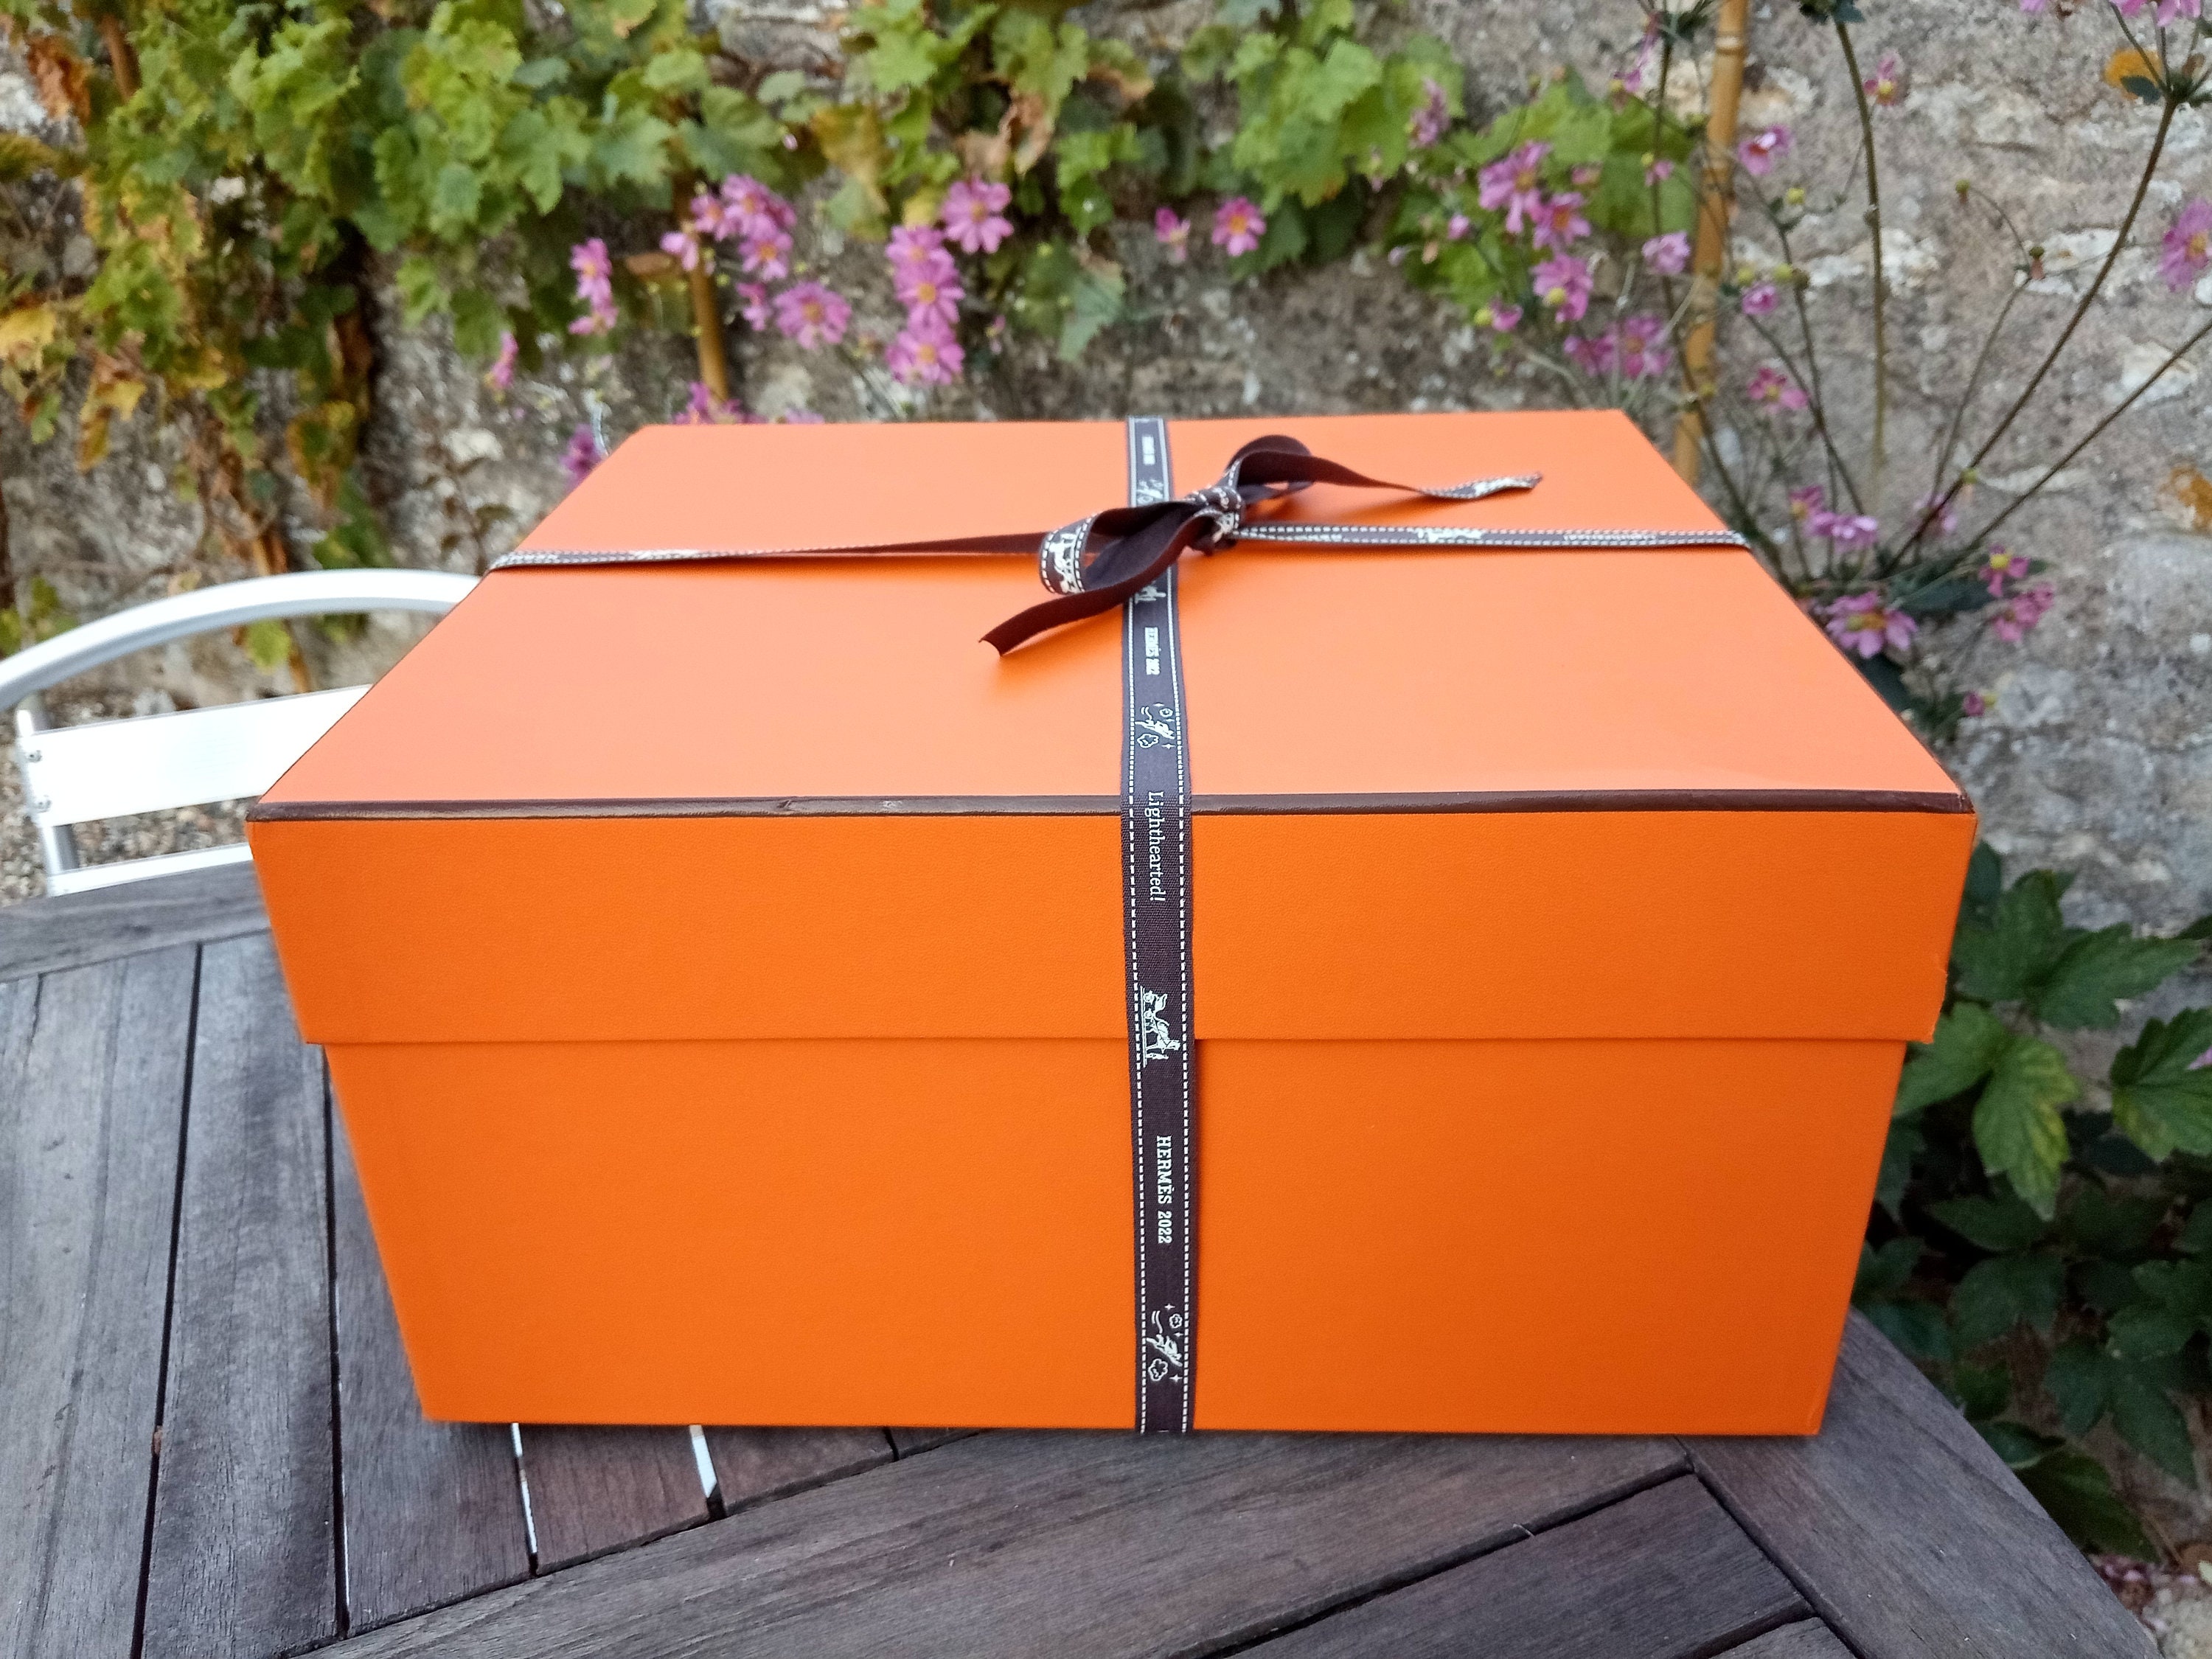 Authentic HERMES Box for Gift 5” x 5” x 2.25”